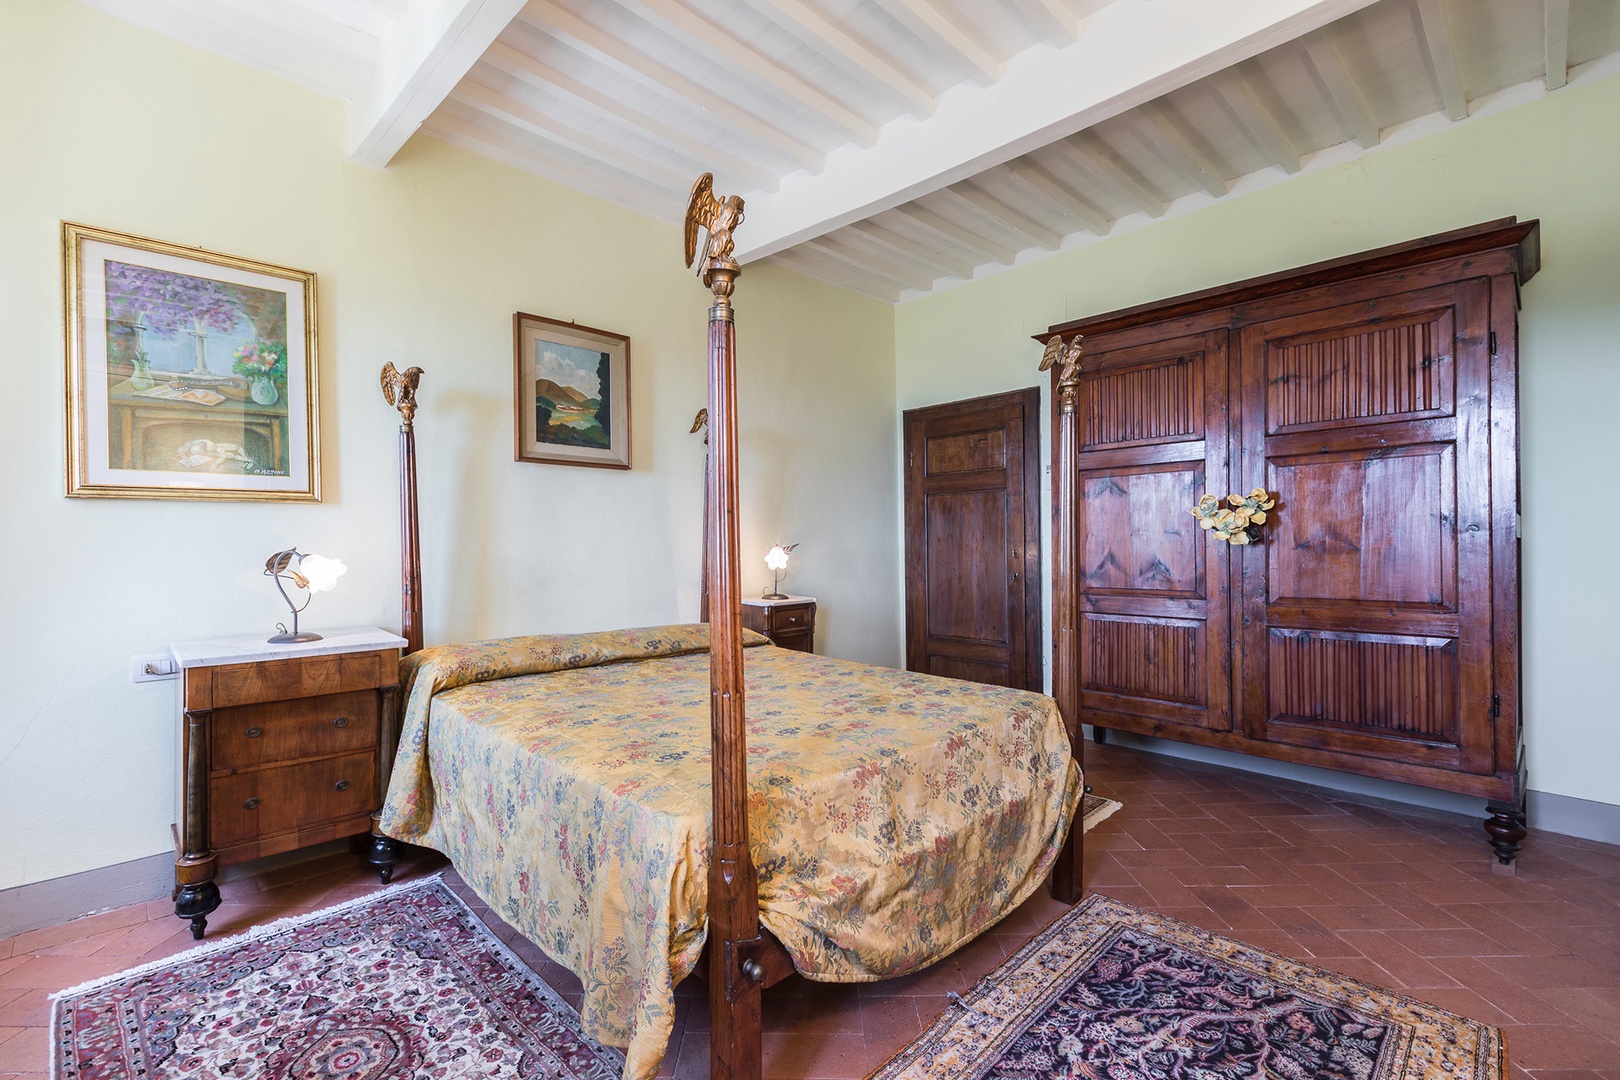 Bedroom 3 was used by the first king of Italy. En suite bathroom.